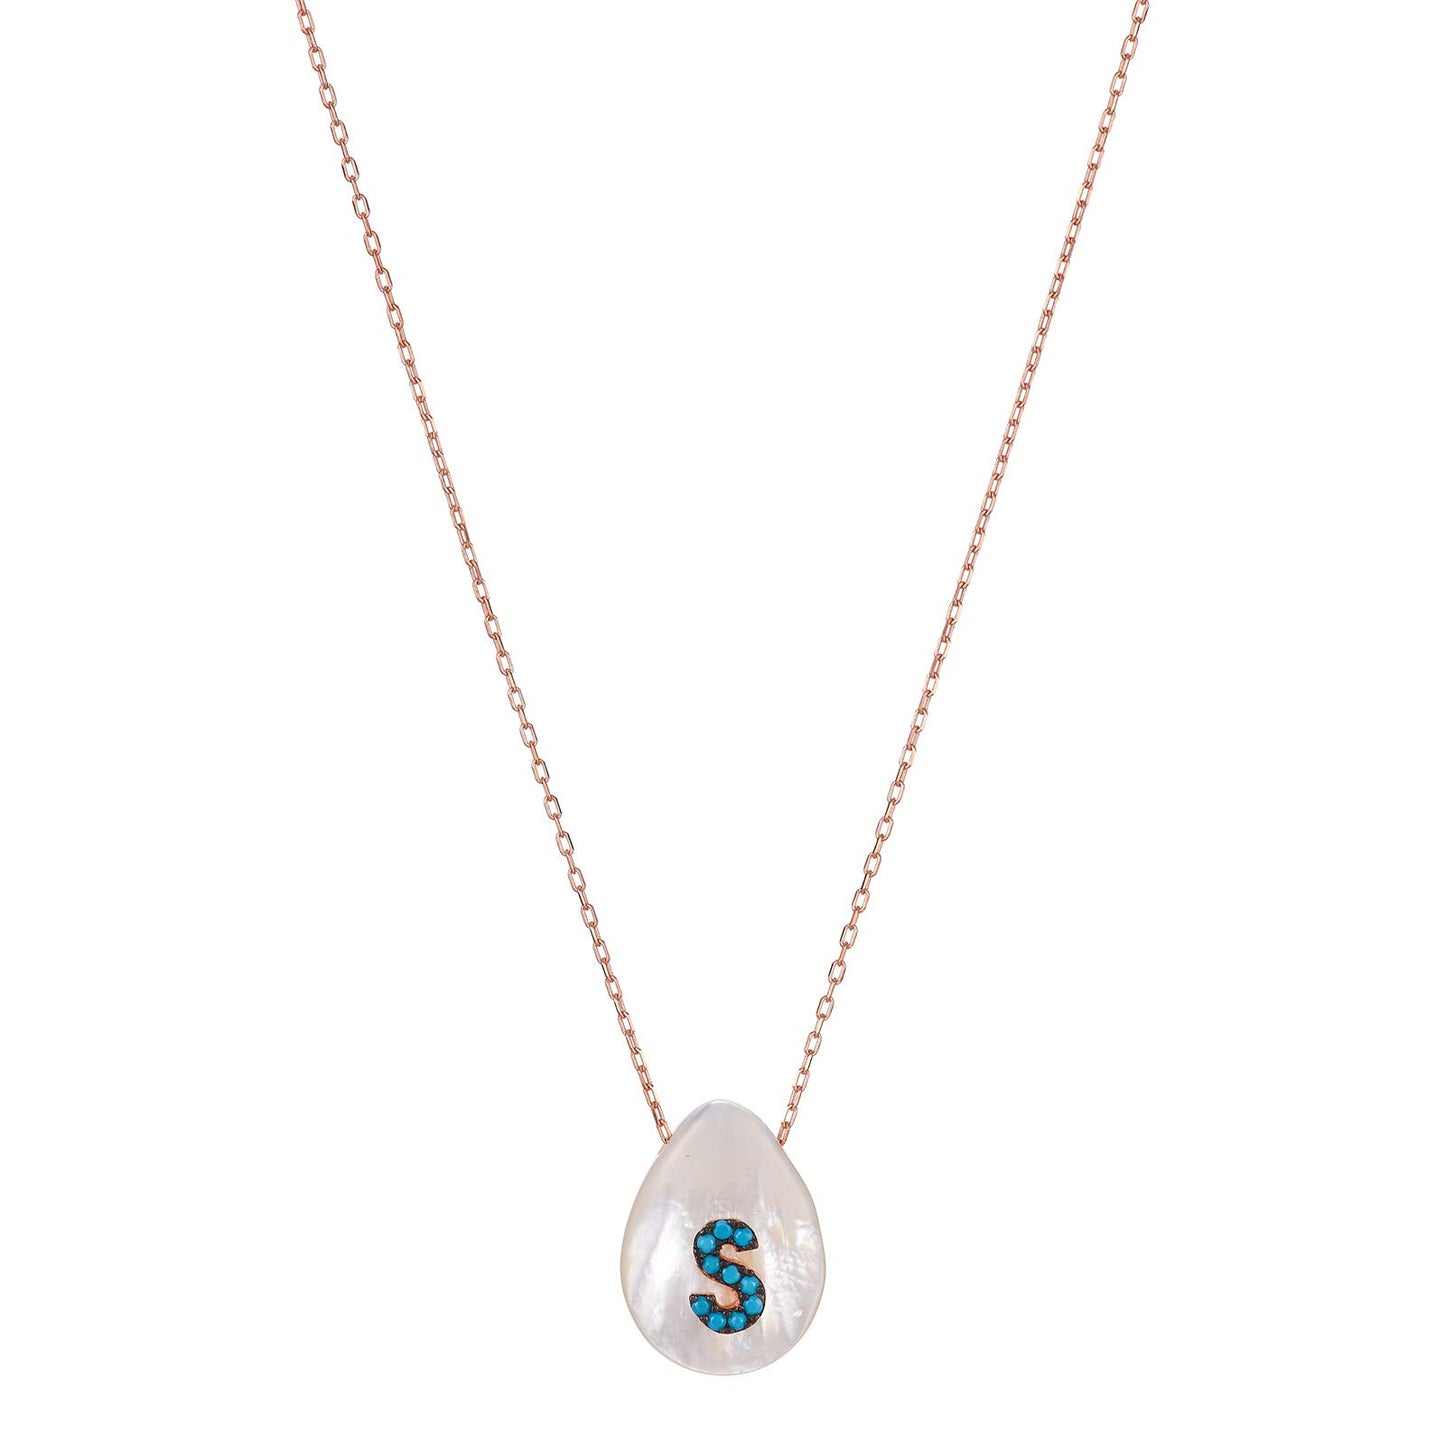 Alwan Silver (Rose Gold Plated) Necklace with Letter S on Mother of Pearl for Women - EE5372NRTS